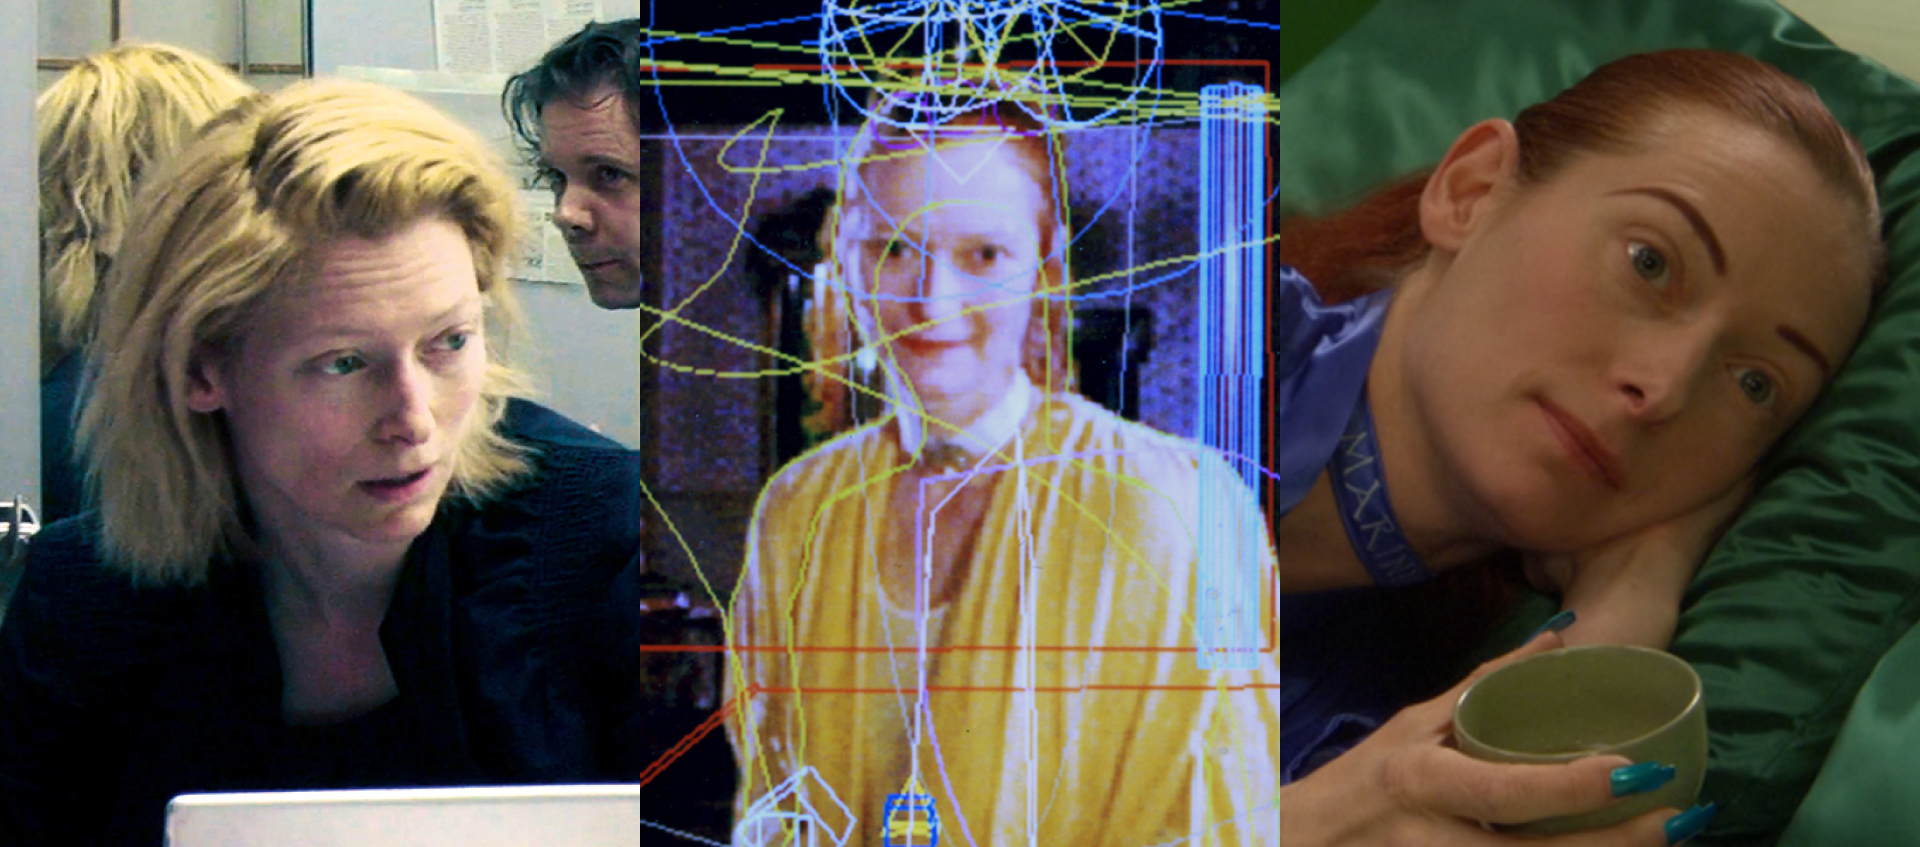 Three images of Tilda Swinton. From left to right: Swinton speaking while wearing a black shirt and jacket, in the center she wears a yellow coat with her red hair pulled back the image is covered in lines of different colors that appear to have been added digitally, the third image she lays on her side and holds a coffee cup. Her fingernails are painted blue and her shirt is also blue